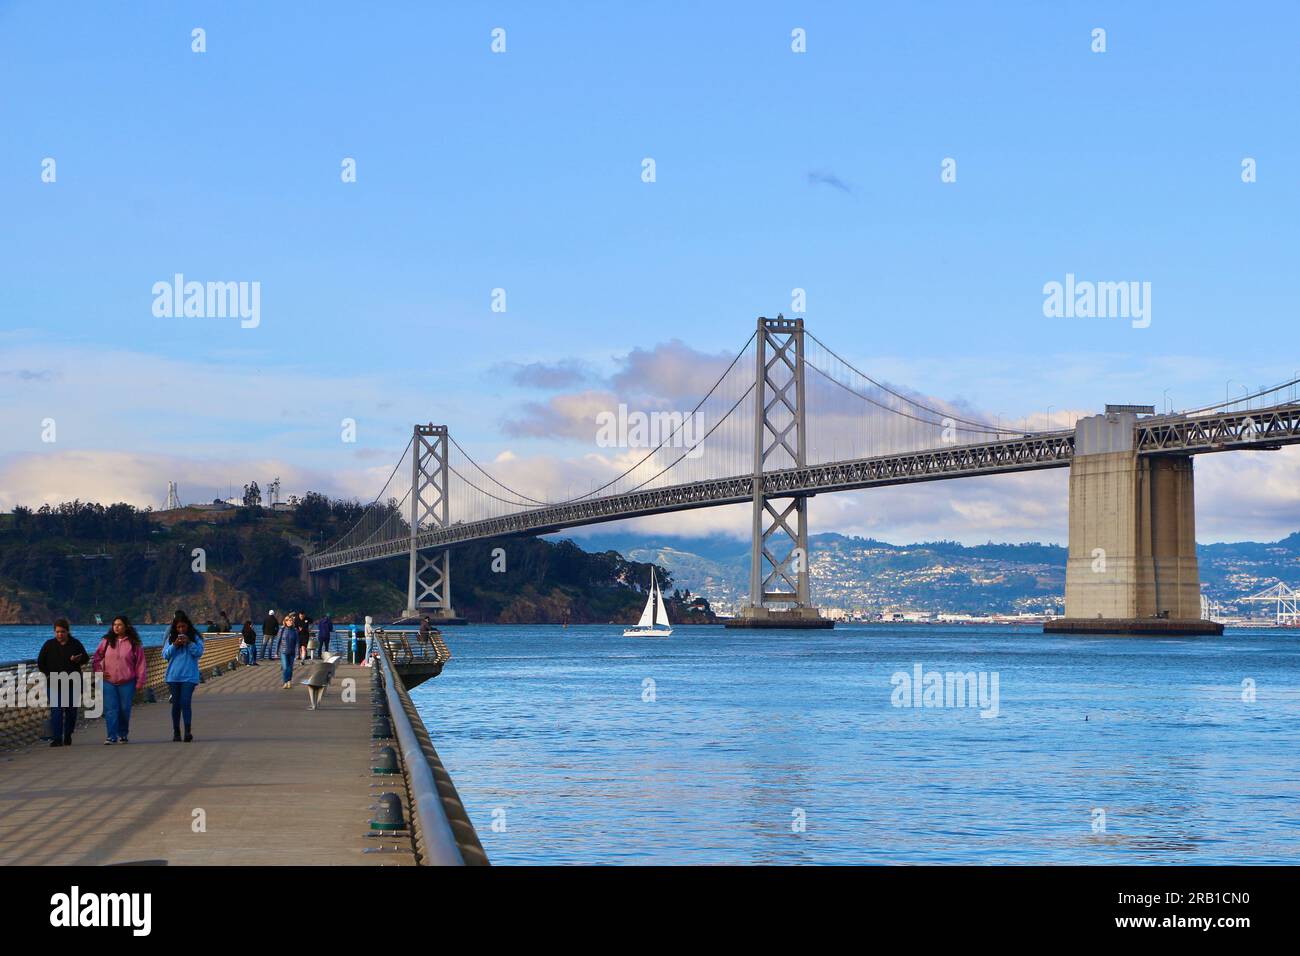 Tourists on Pier 14 with a landscape view of the bay and Bay Bridge with a passing yacht under full sail The Embarcadero San Francisco California USA Stock Photo